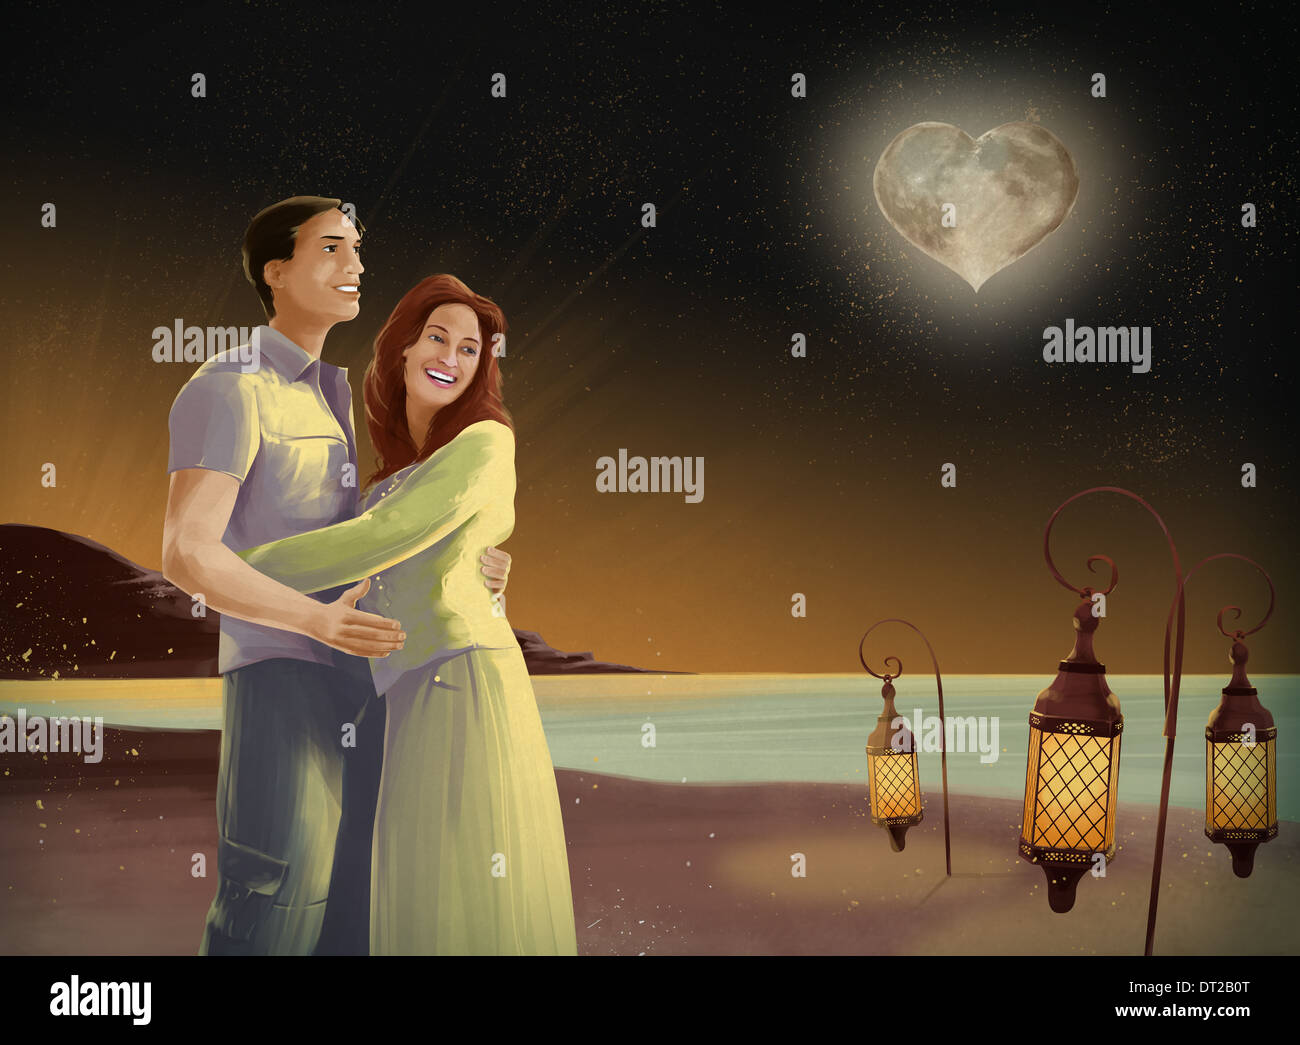 Illustrative image of couple embracing on beach at night with heart shape moon Stock Photo